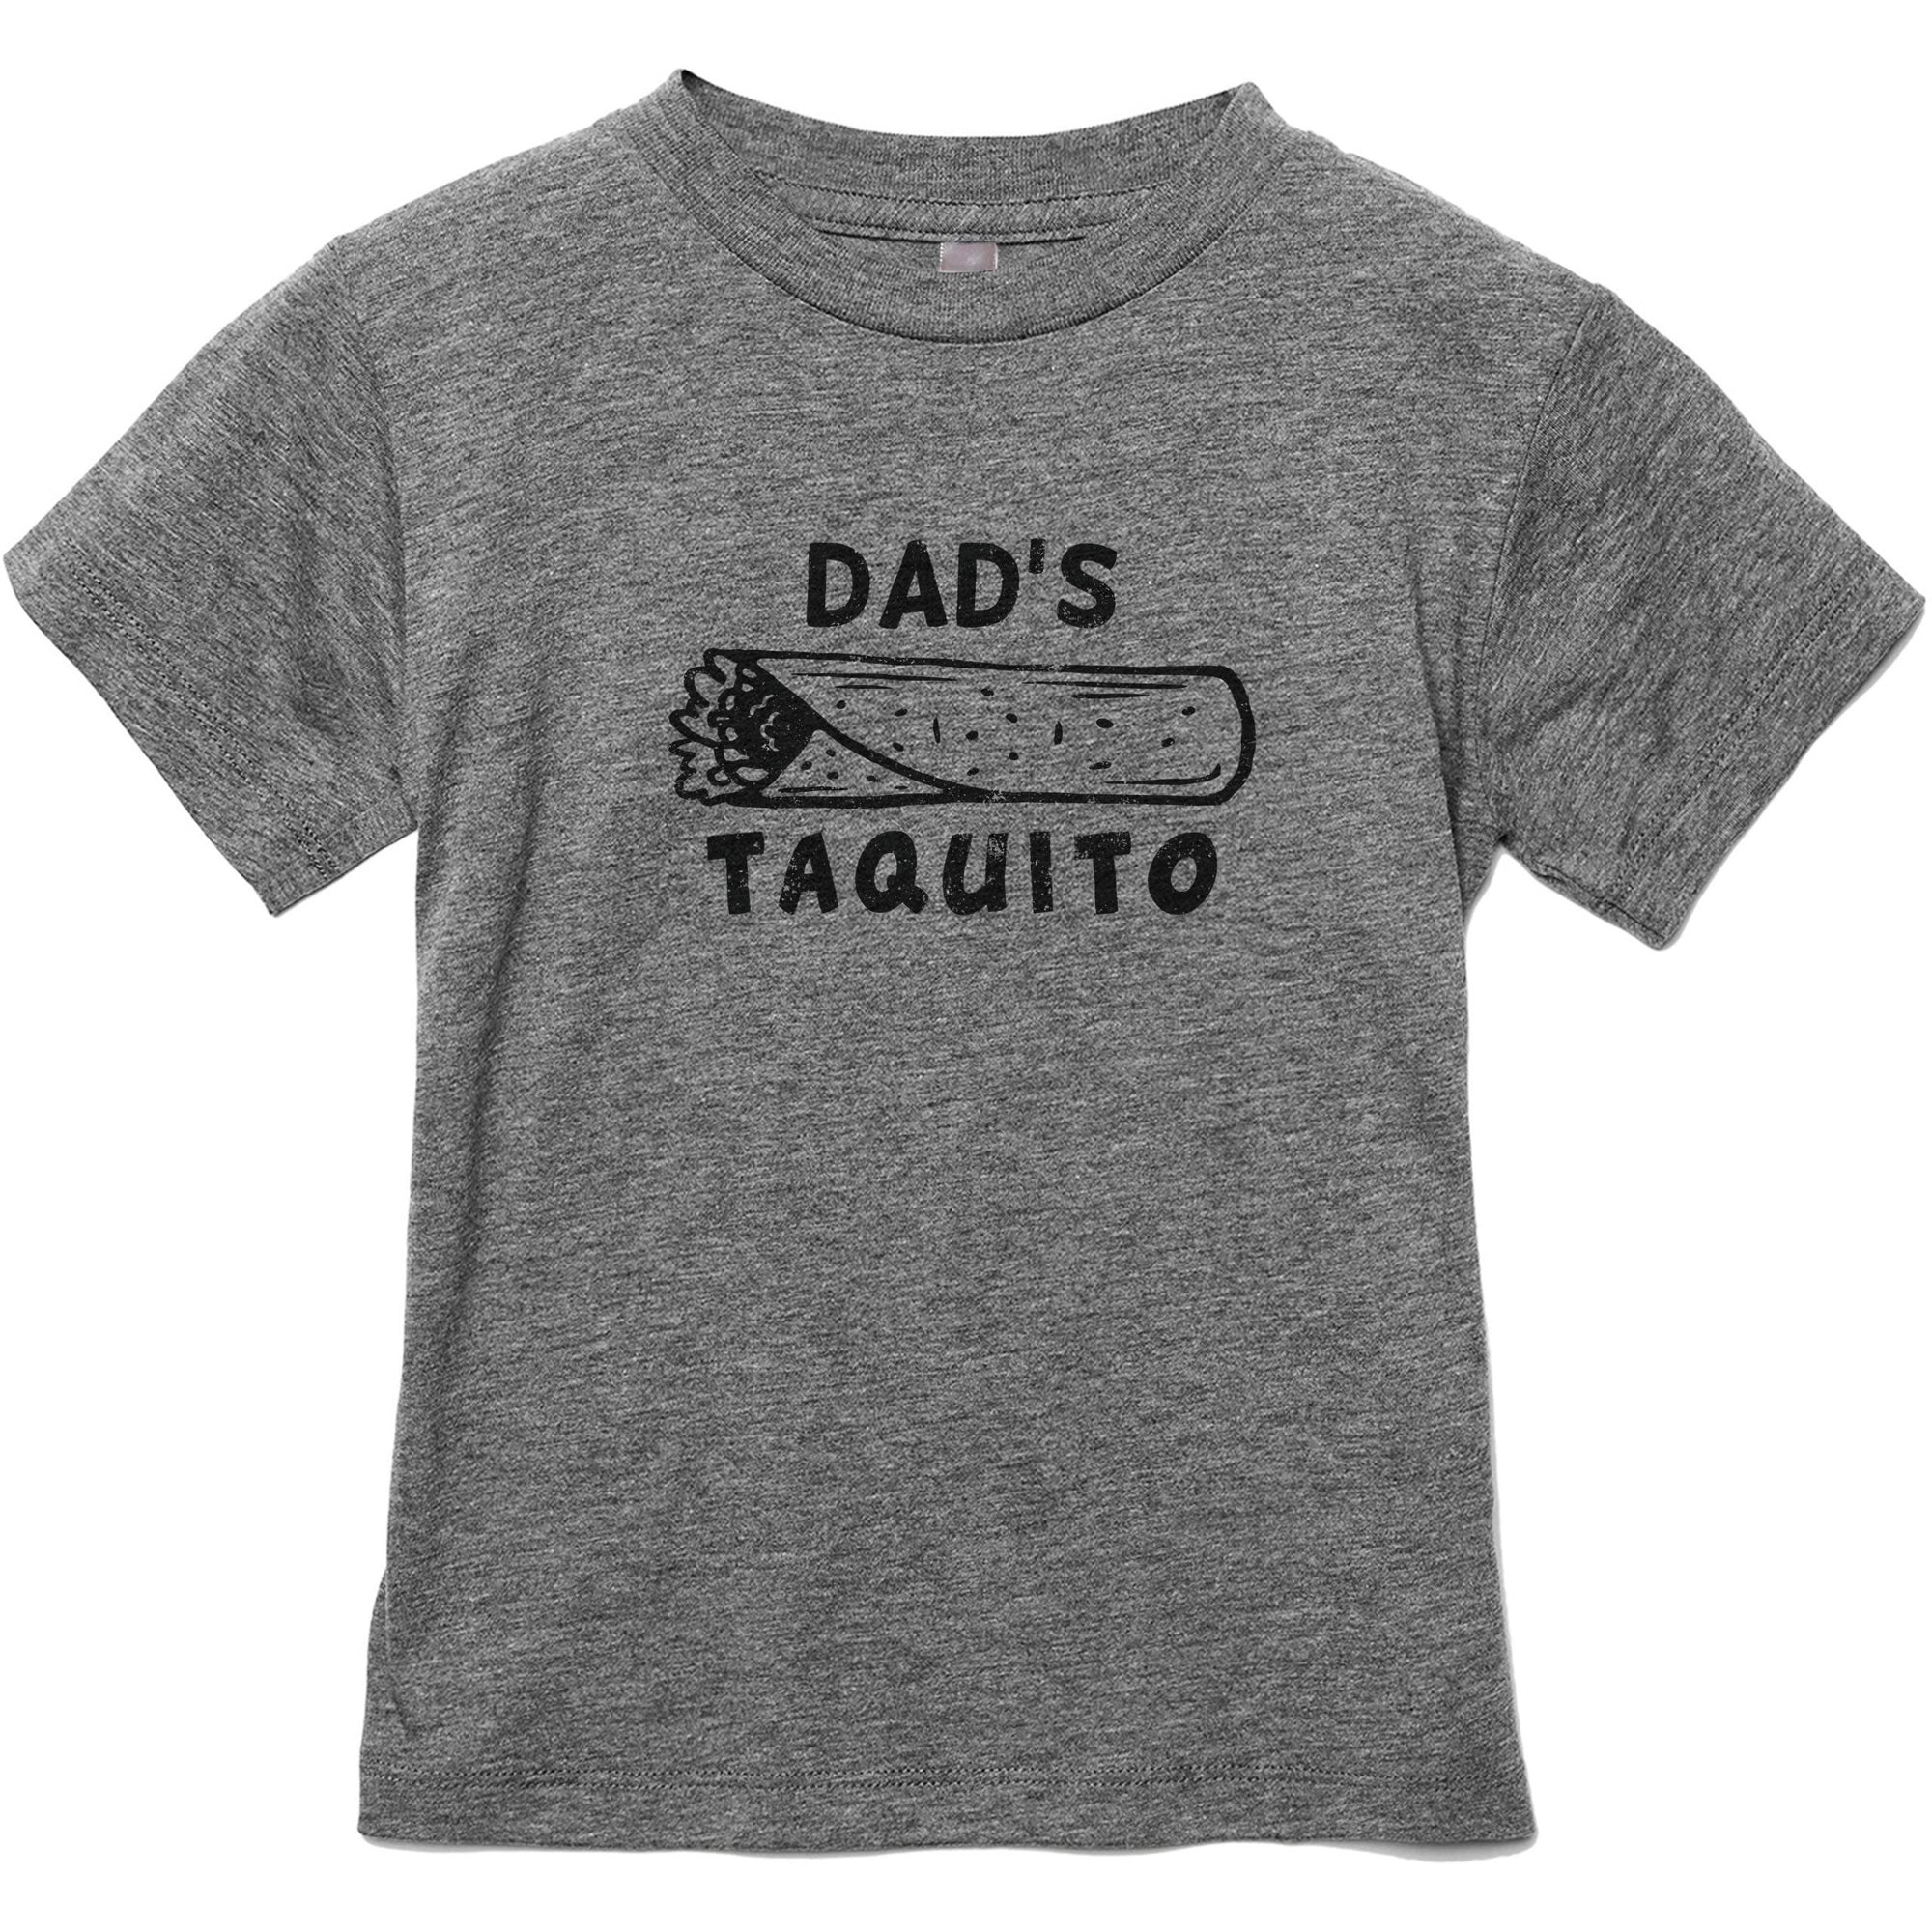 Dad's Taquito - thread tank | Stories you can wear.